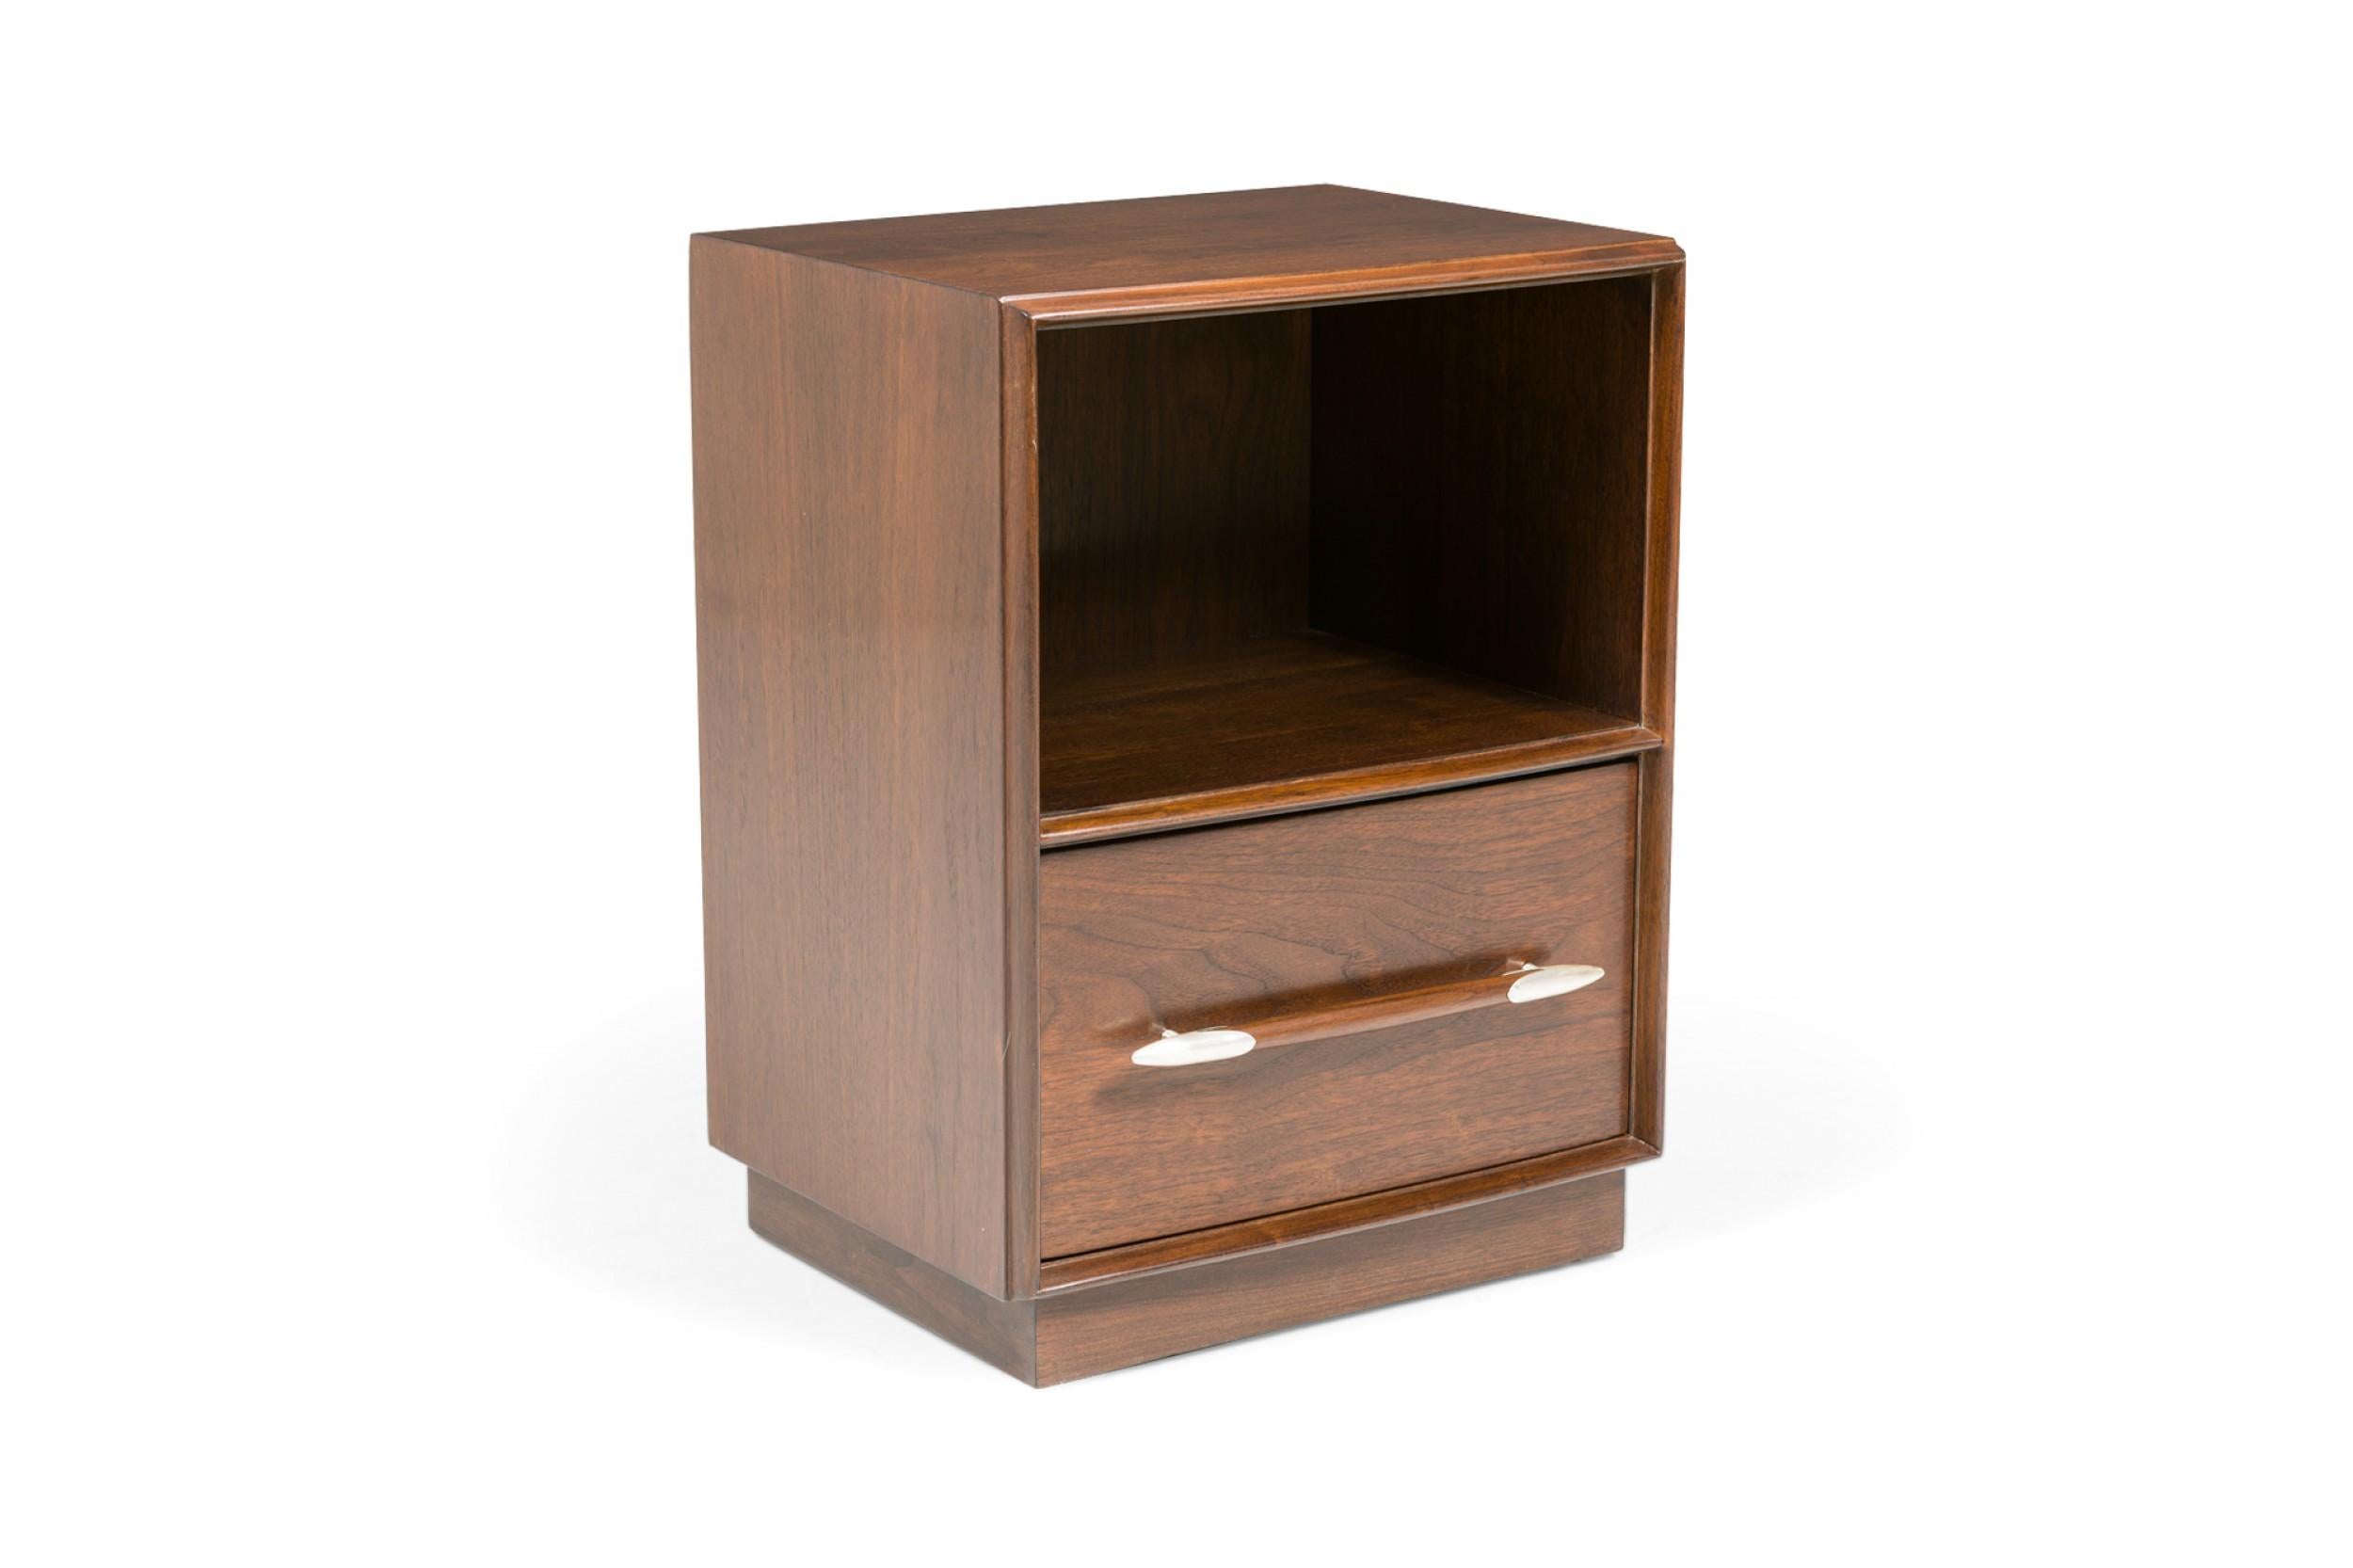 PAIR of American Mid-Century walnut end / side tables with an open compartment above a single lower drawer with a rounded walnut bar drawer pull with tapered brushed chrome caps at either end. (T.H. ROBSJOHN-GIBBINGS FOR WIDDICOMB FURNITURE